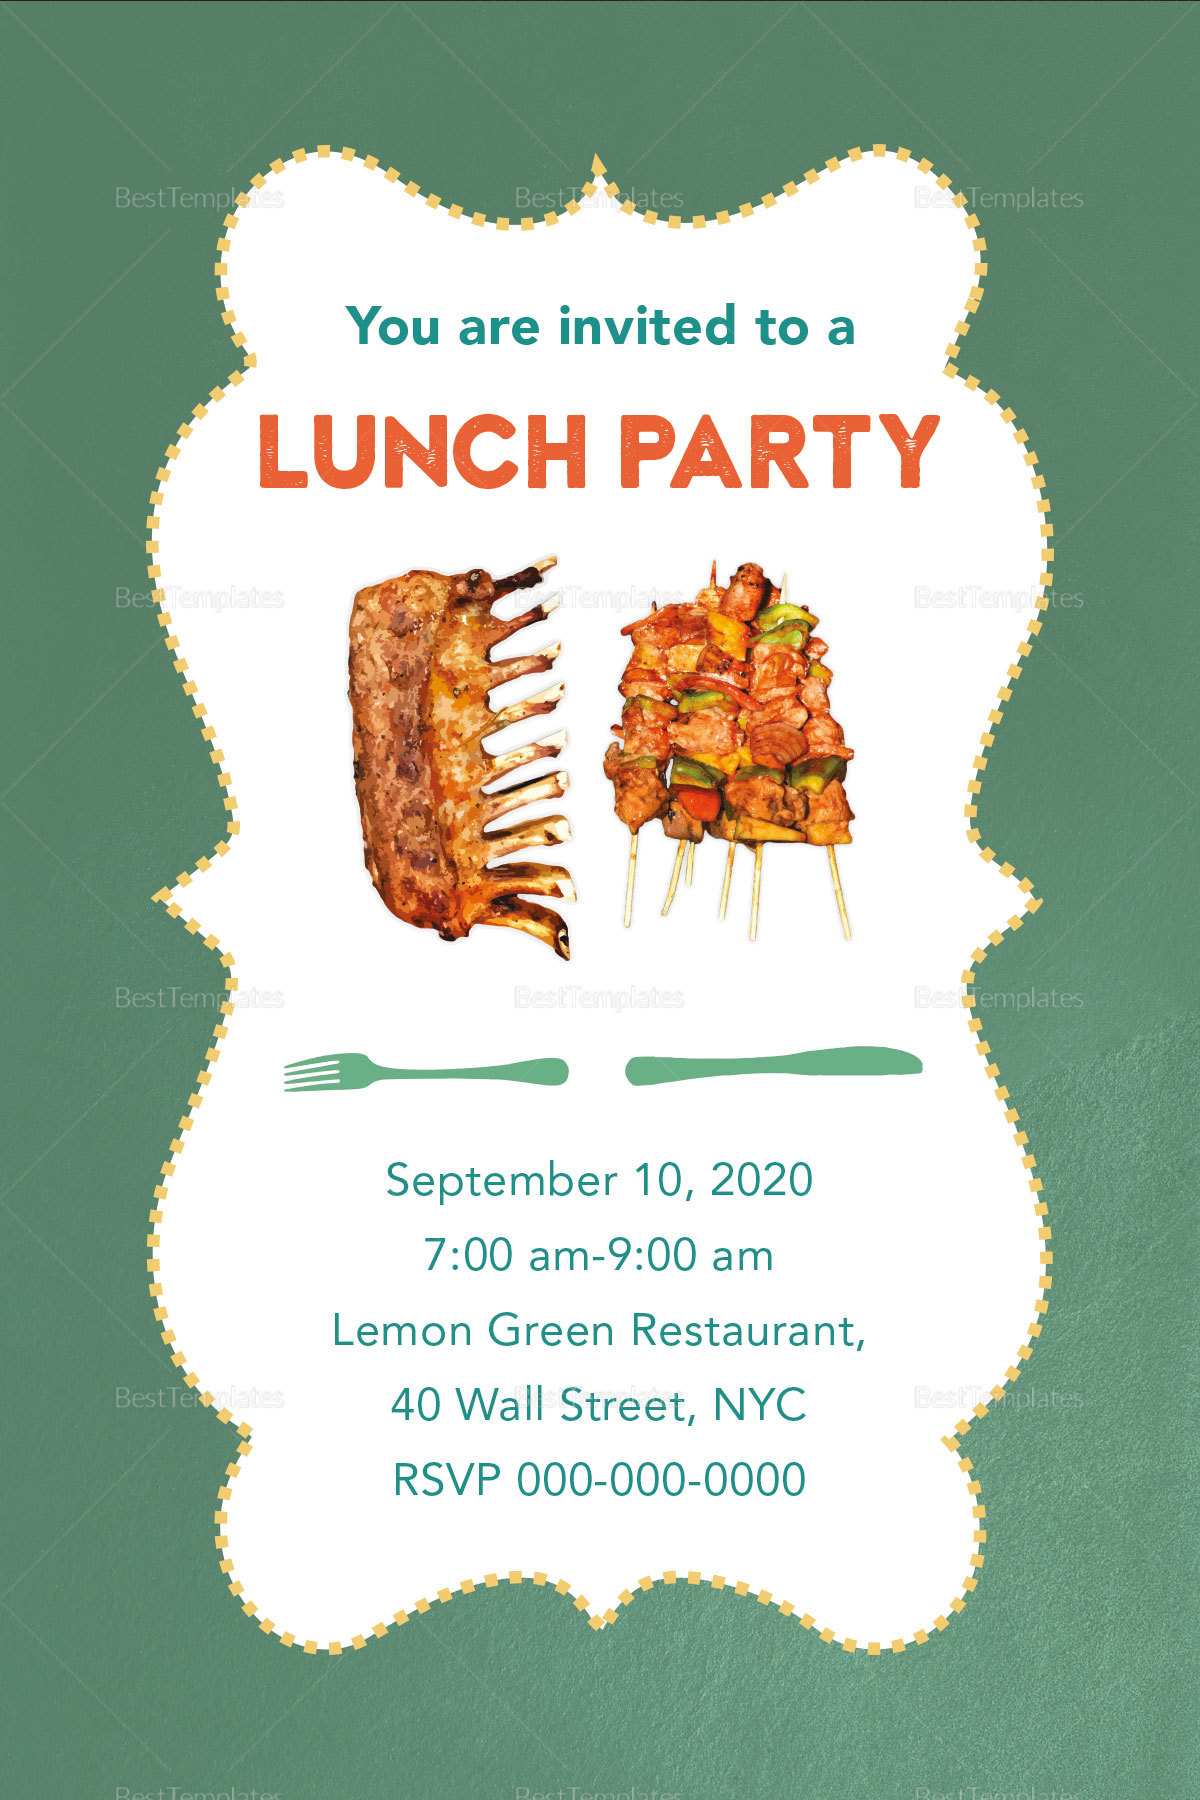 85 Creative Lunch Party Invitation Template Download For Lunch Party Invitation Template Cards